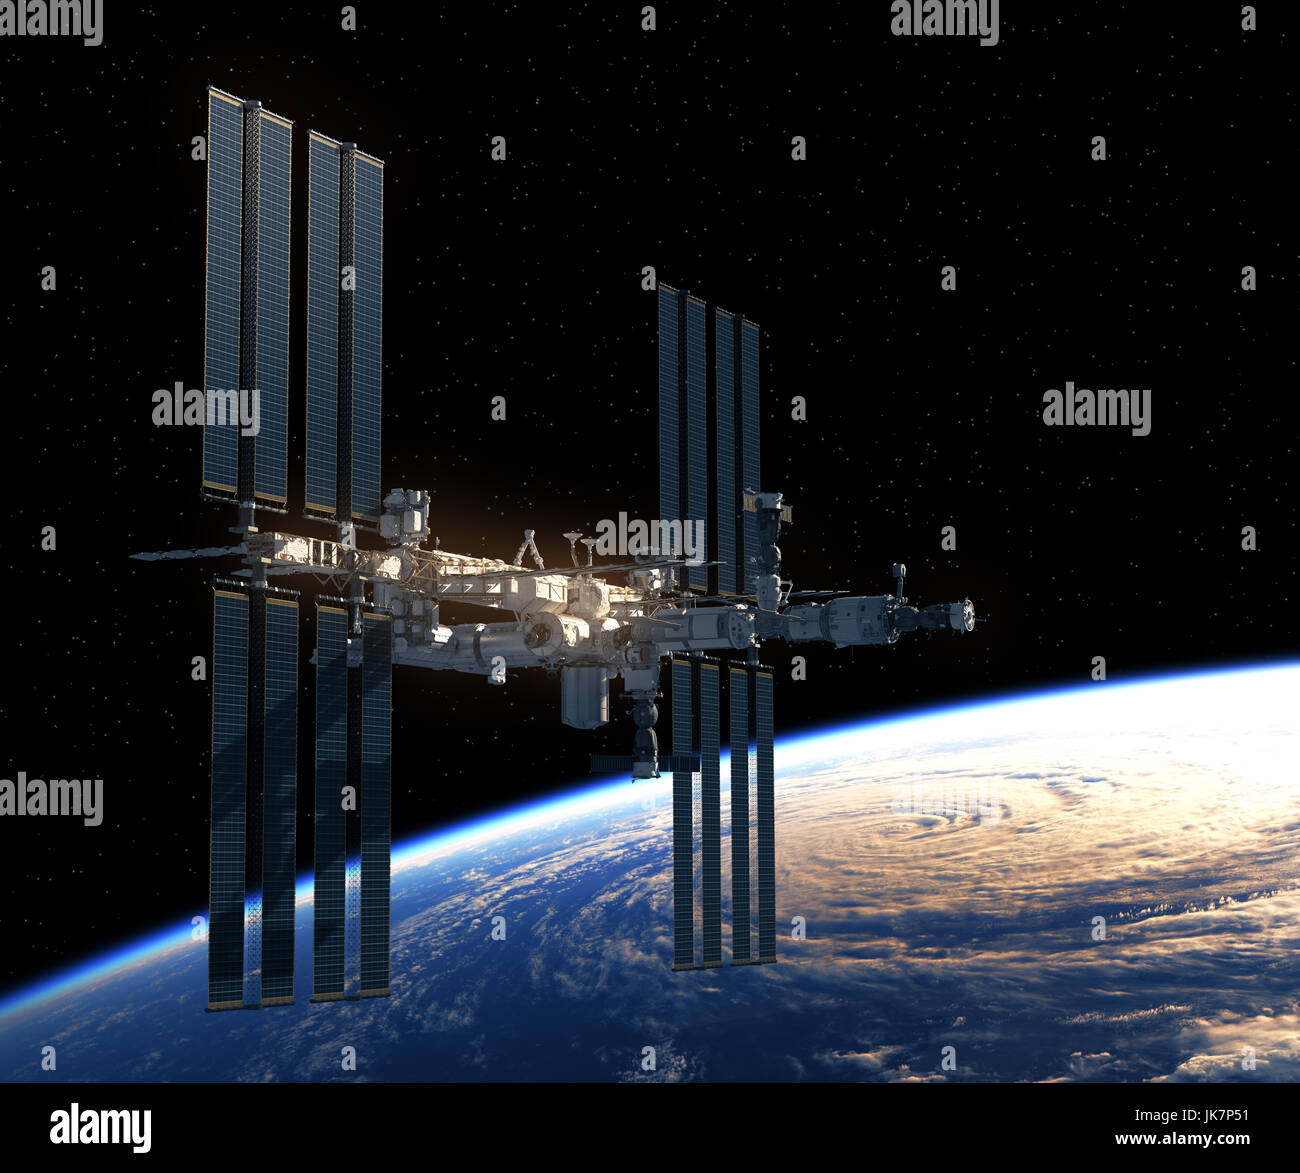 Flight Of International Space Station Over The Earth. 3D Illustration. Stock Photo